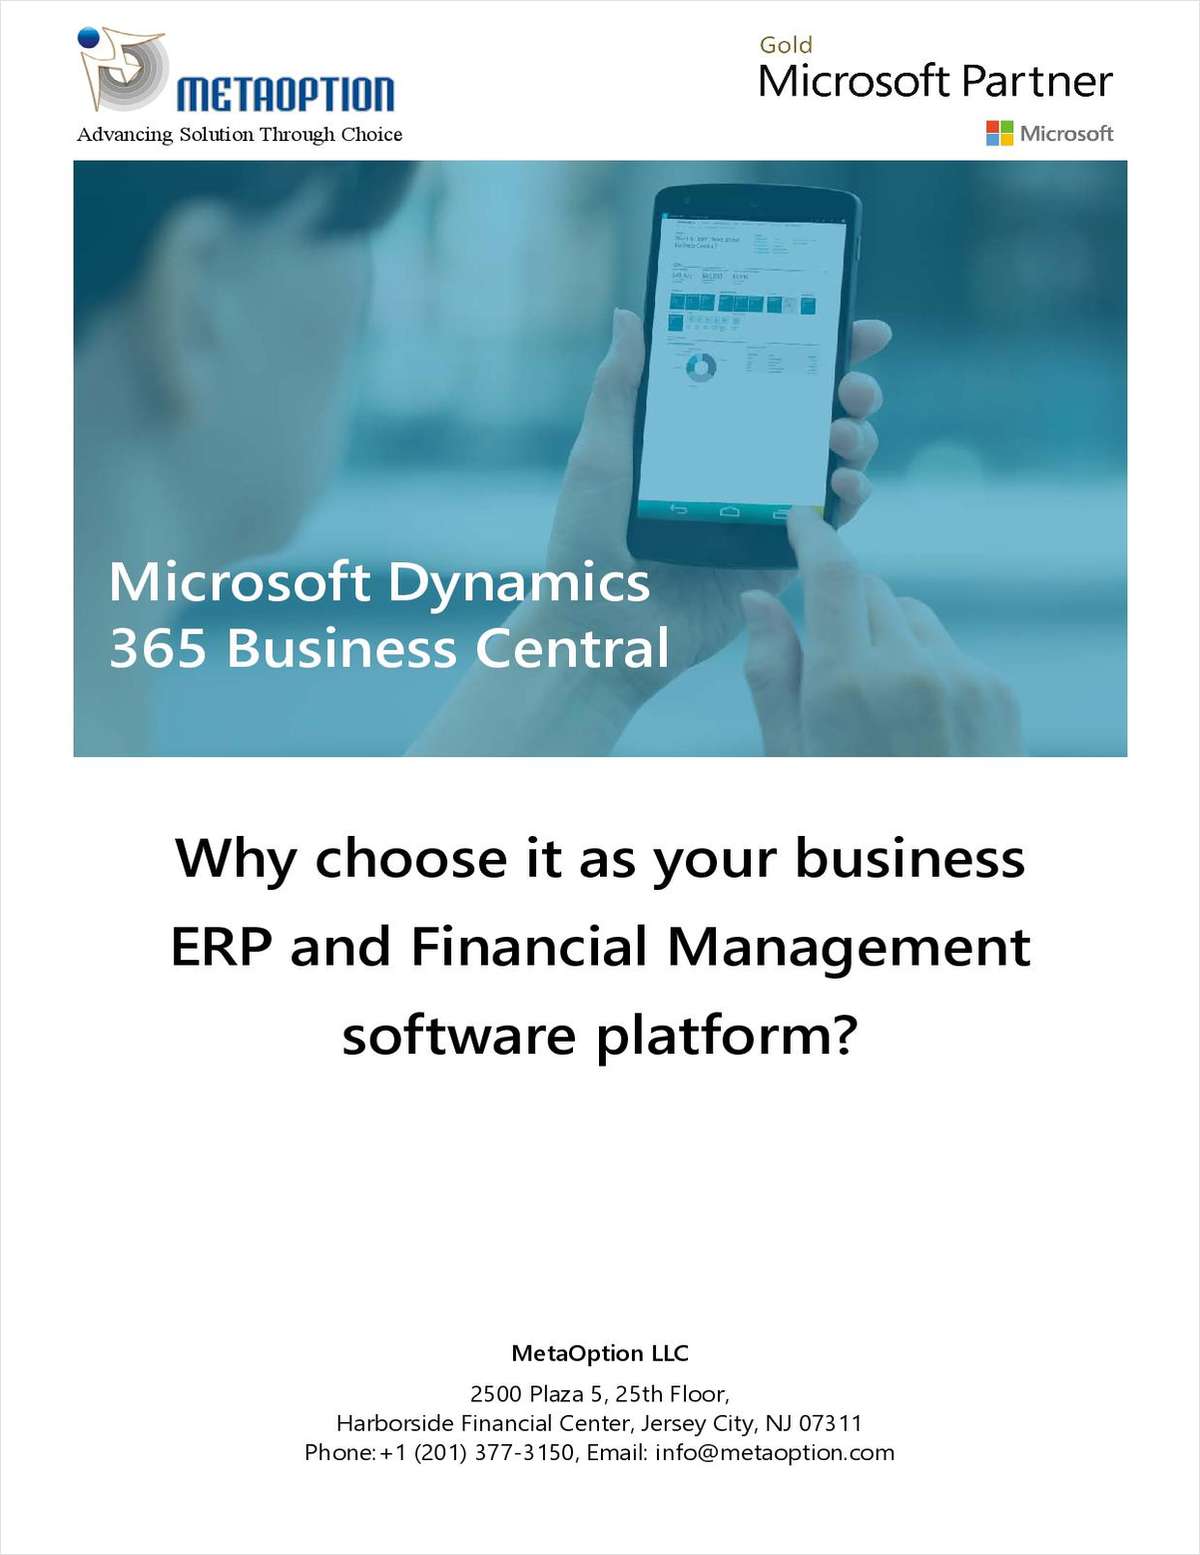 Why Choose Dynamics 365 Business Central as Your Business ERP and Financial Management Software Platform for Manufacturers?